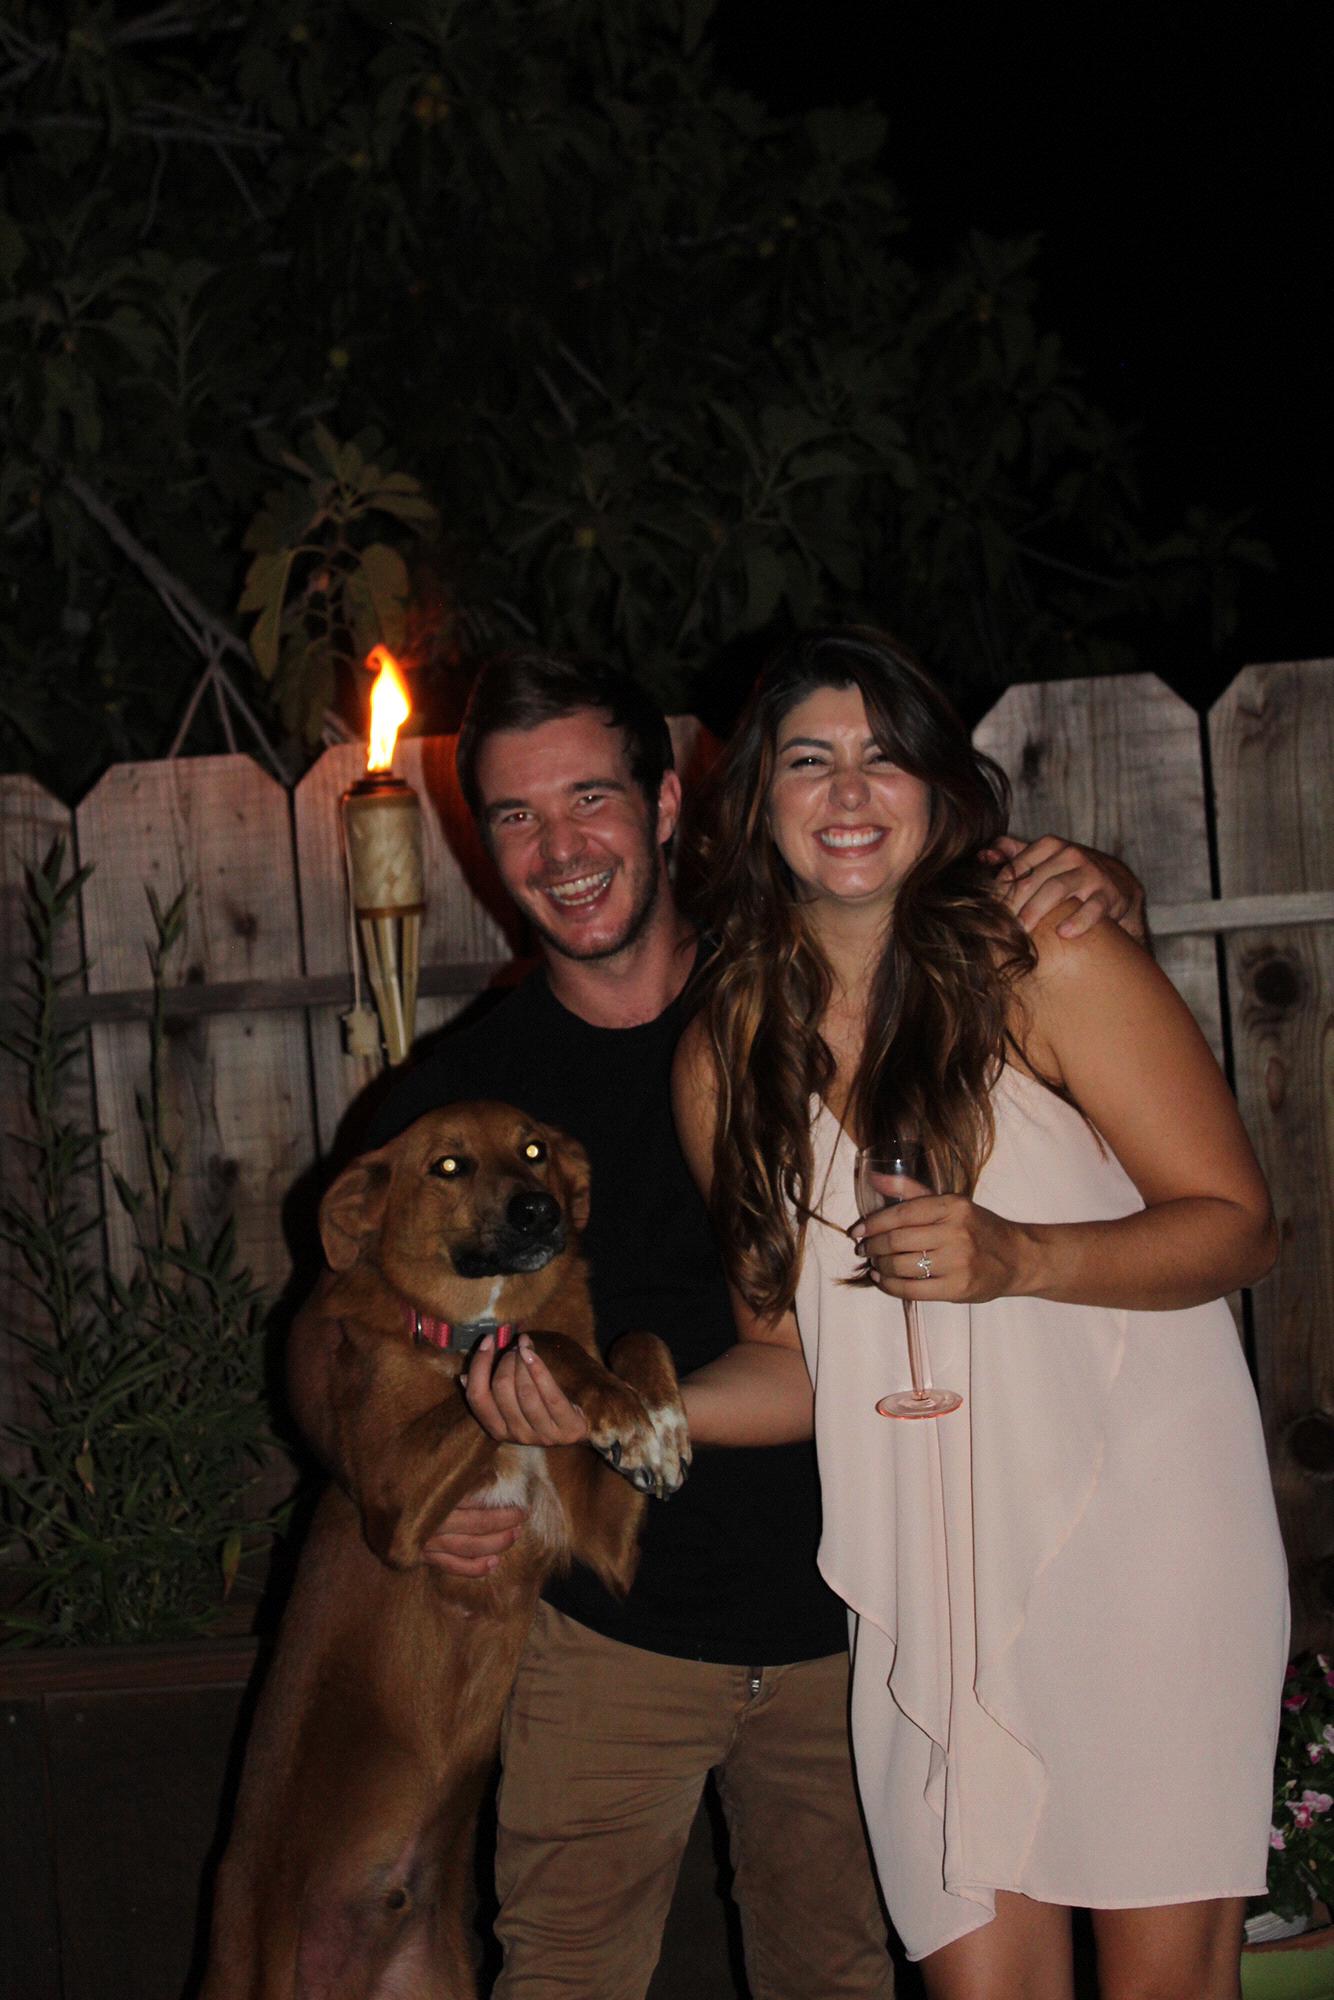 Our engagement party and Ollie, August 2019